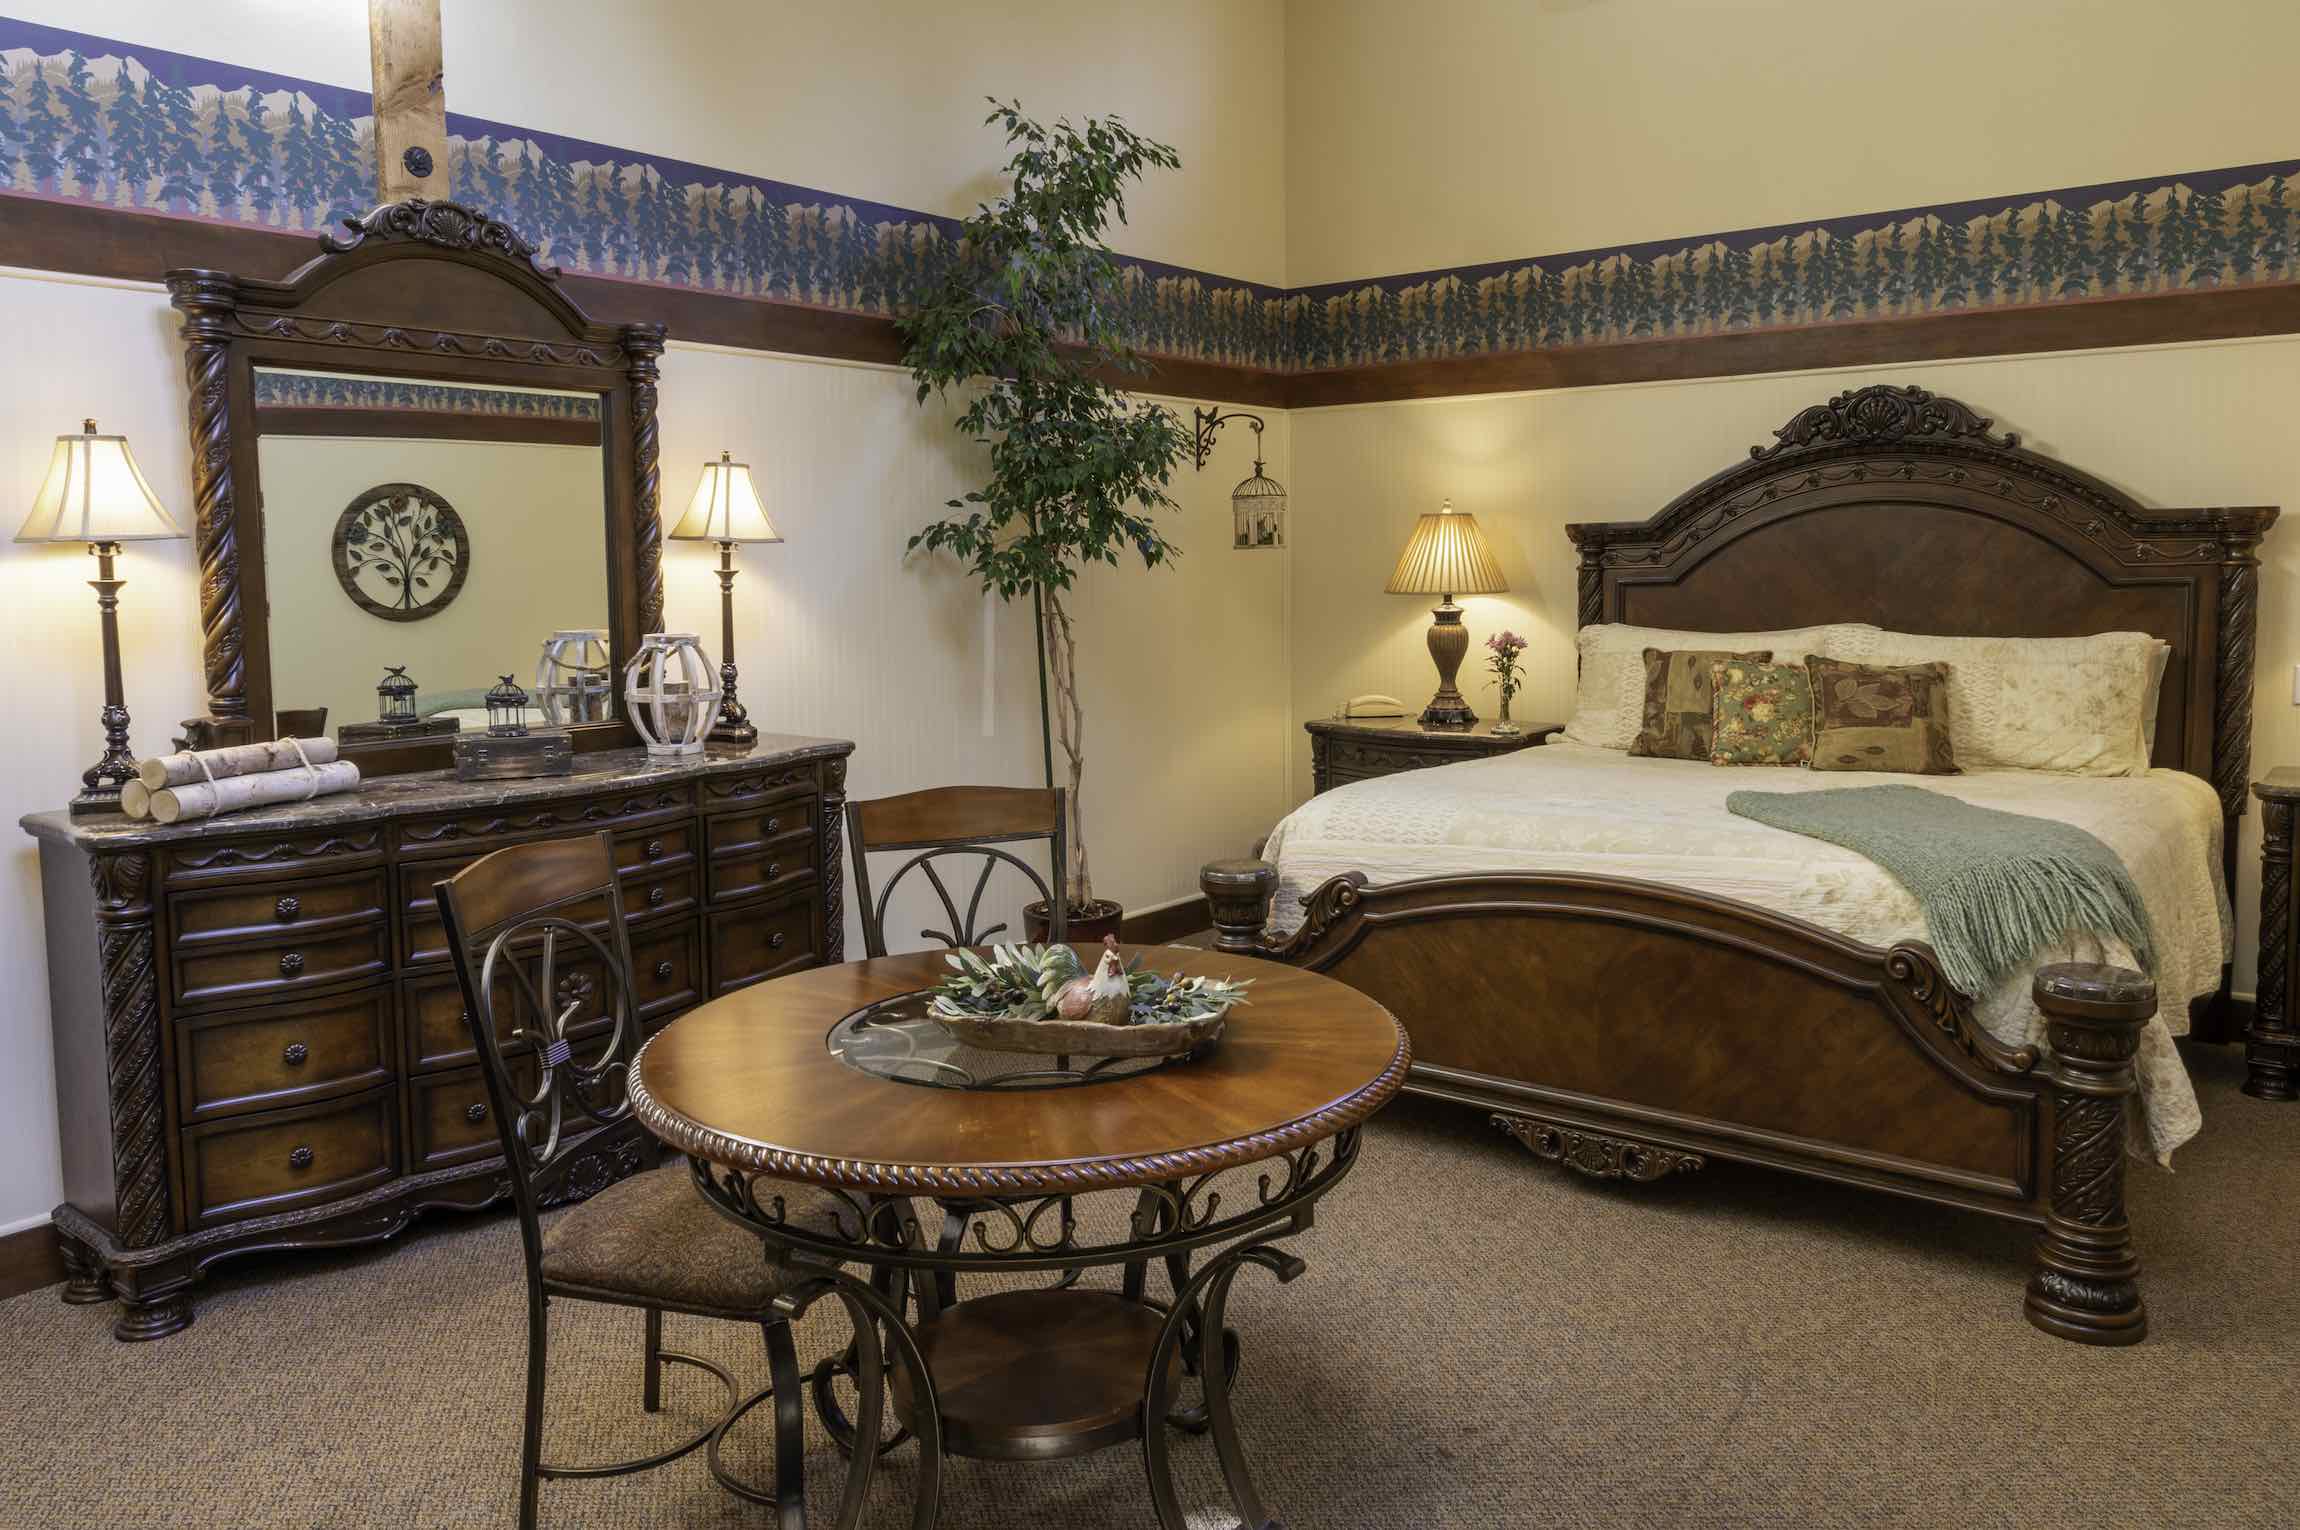  The Pine Ridge Suite at Country Willows Inn & Estate in Ashland, Oregon has high ceilings with skylights and a spacious, open floor plan making it easy to relax with friends or enjoy a romantic night with your sweetheart.  